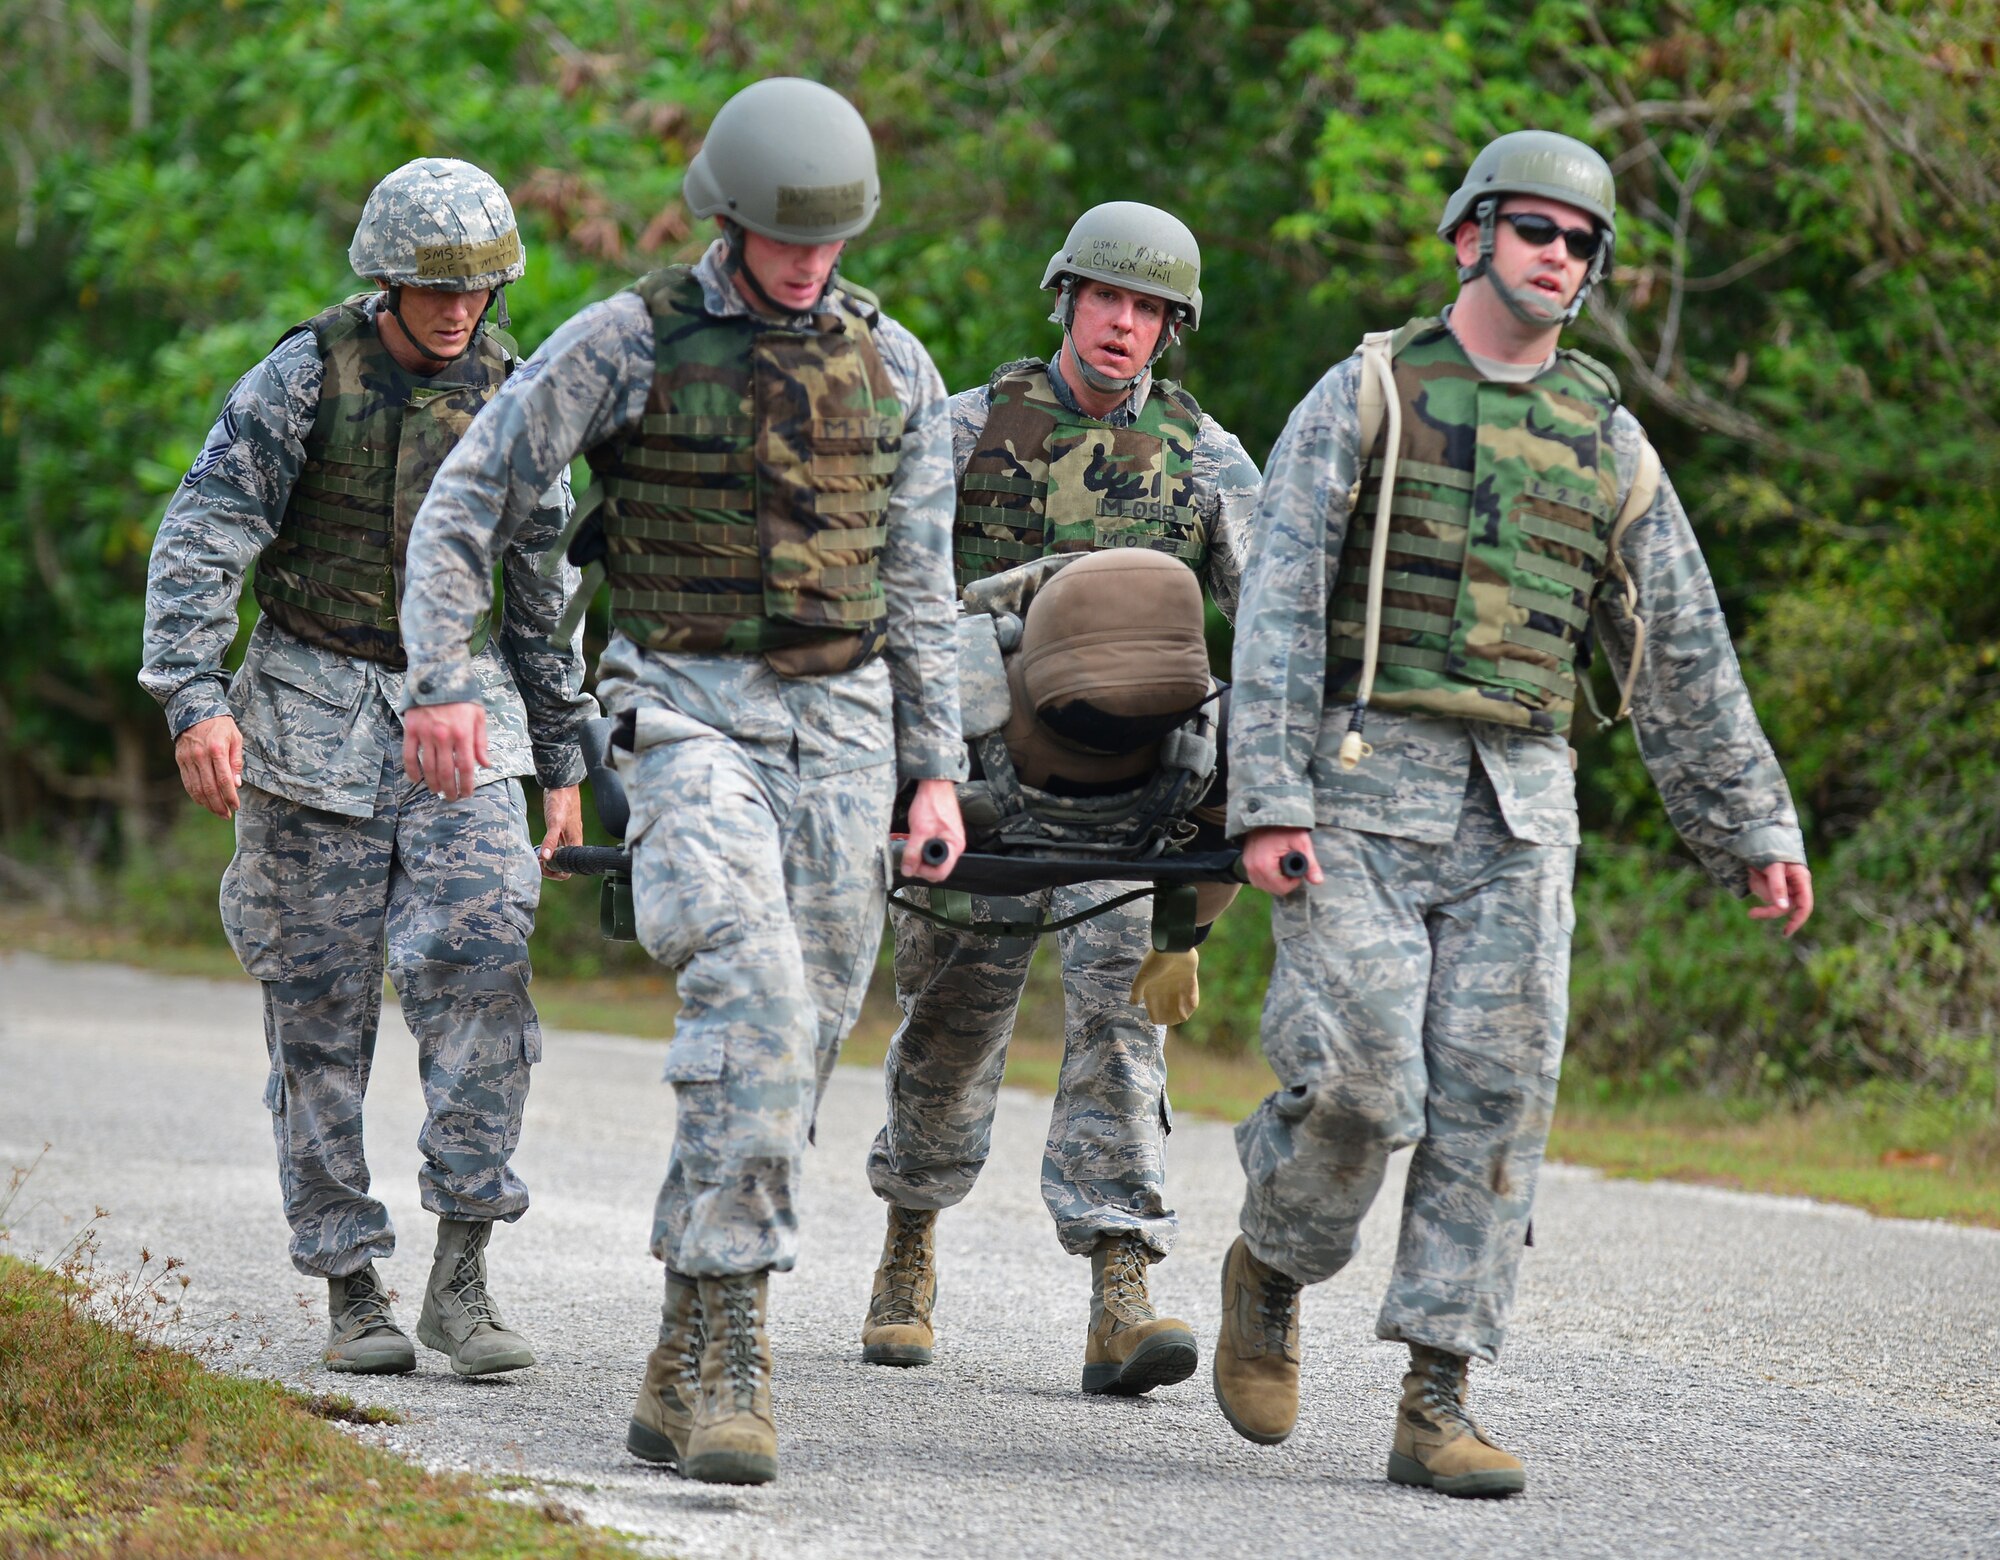 Members from the 36th Operations Support Squadron carry a simulated patient on a litter during the Police Week Defender Challenge May 18, 2016, at Andersen Air Force Base, Guam. In honor of Police Week, the 36th SFS hosted the Defender Challenge, pitting Airmen against a variety of obstacles and navigational tasks. (U.S. Air Force photo by Senior Airman Joshua Smoot)